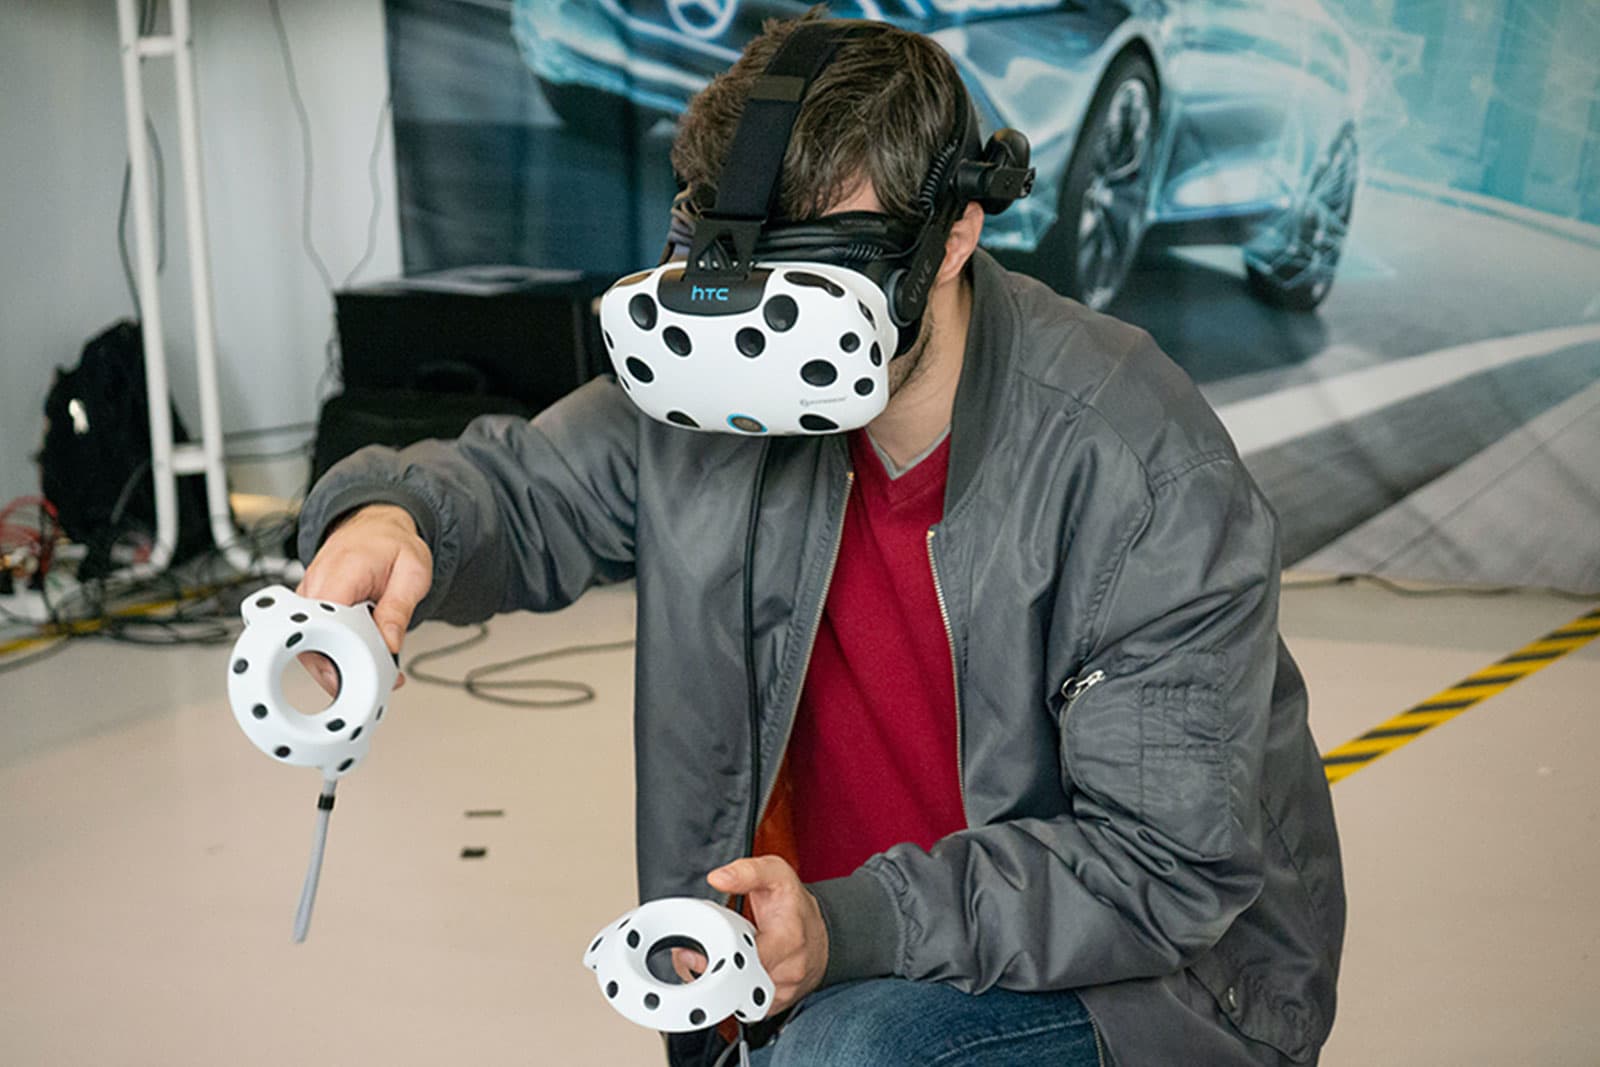 Virtual Reality: A key asset for preserving manual skills?